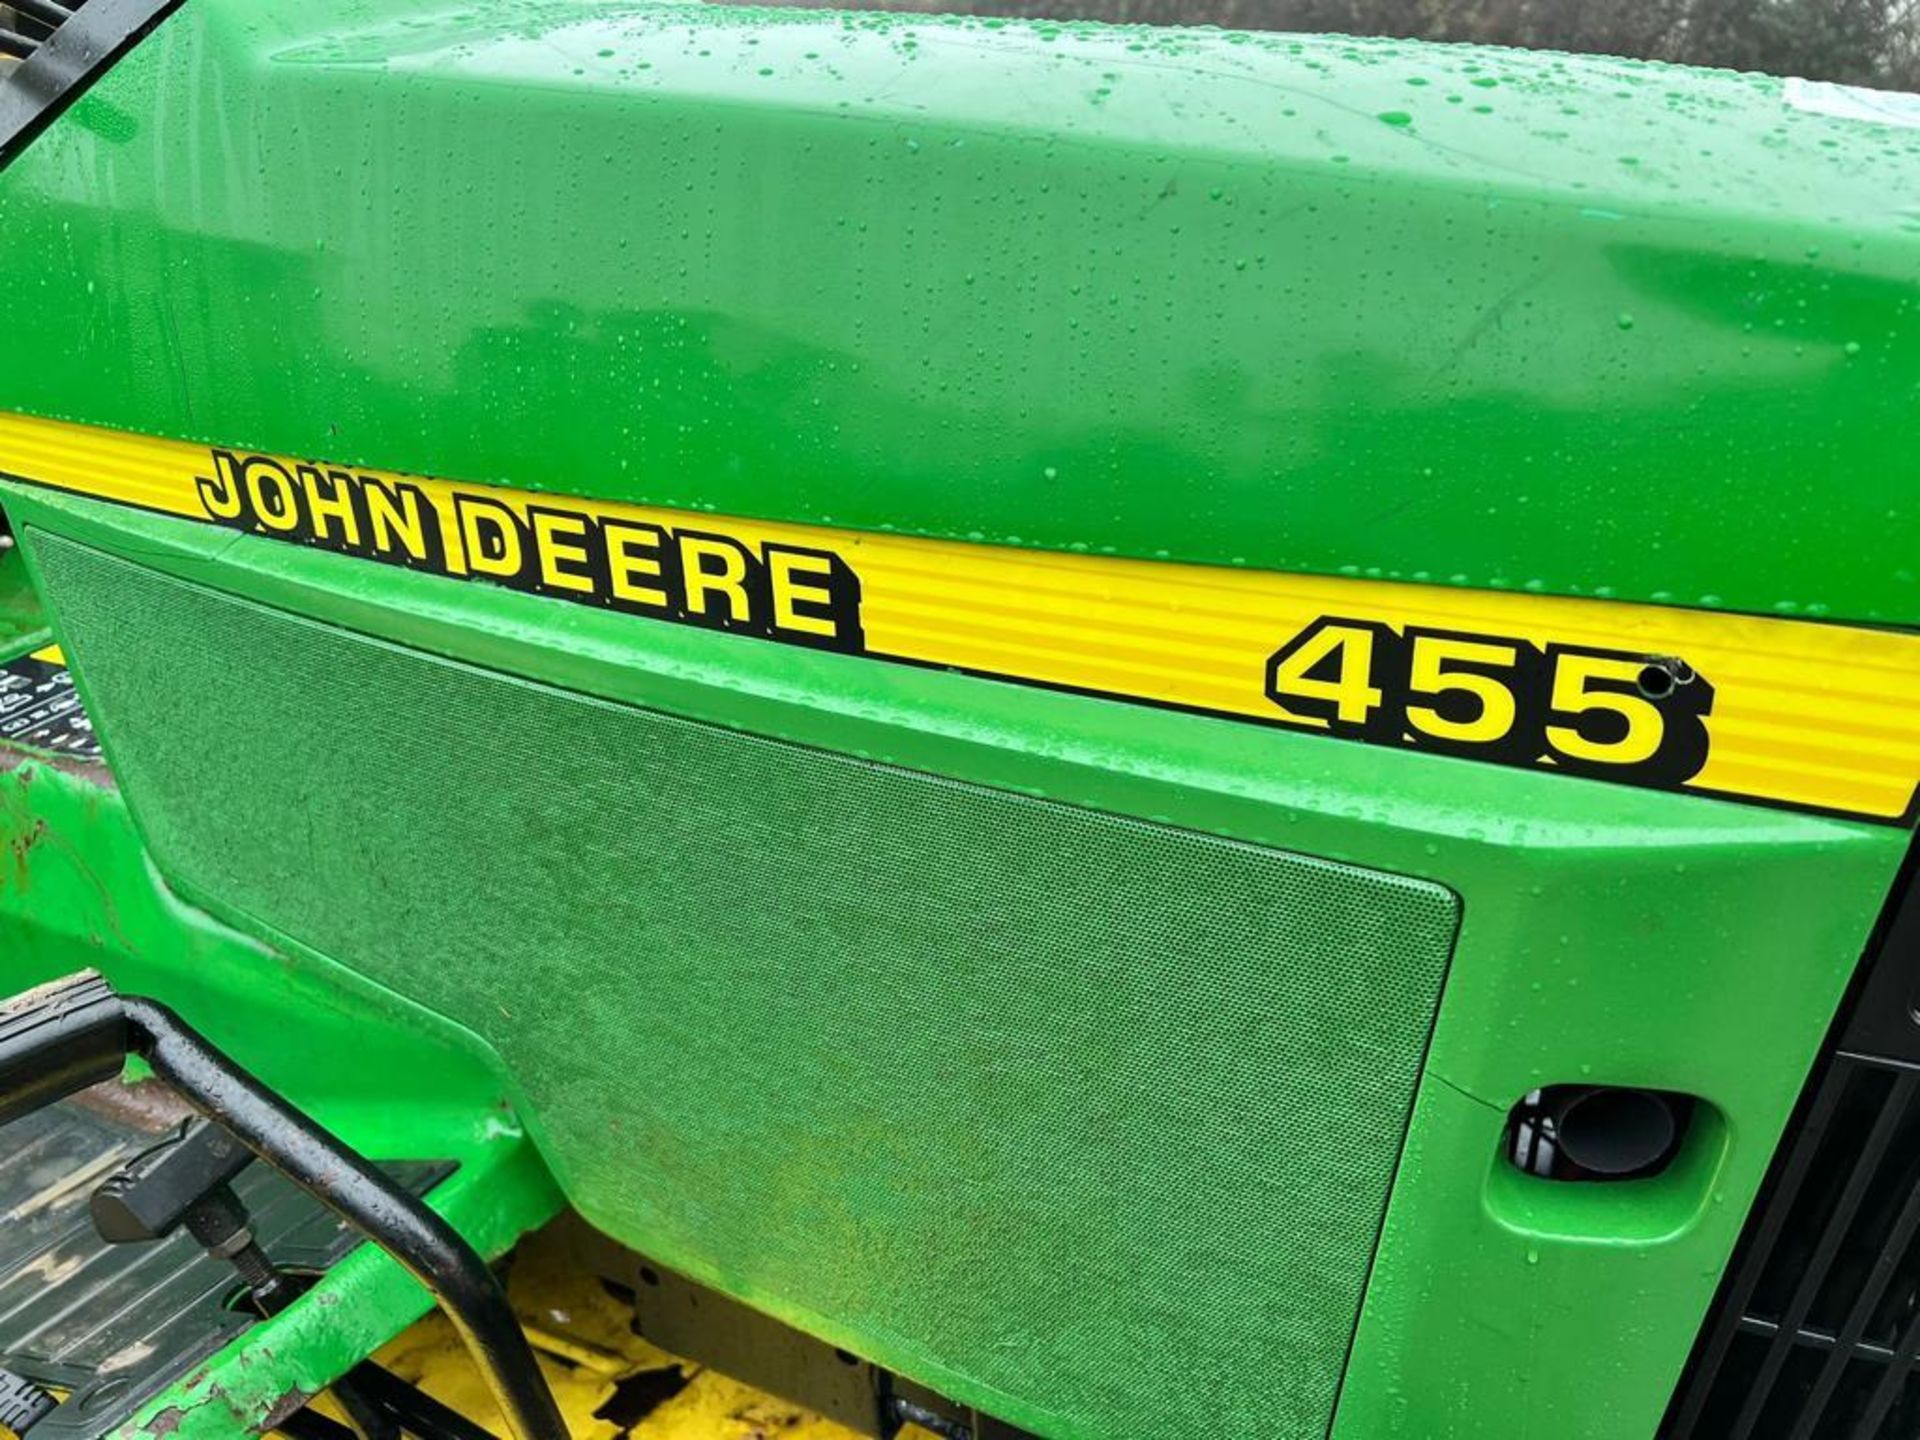 John Deere 455 22HP Diesel Compact Tractor/Ride On Mower With Clamshell Collector - Image 8 of 11